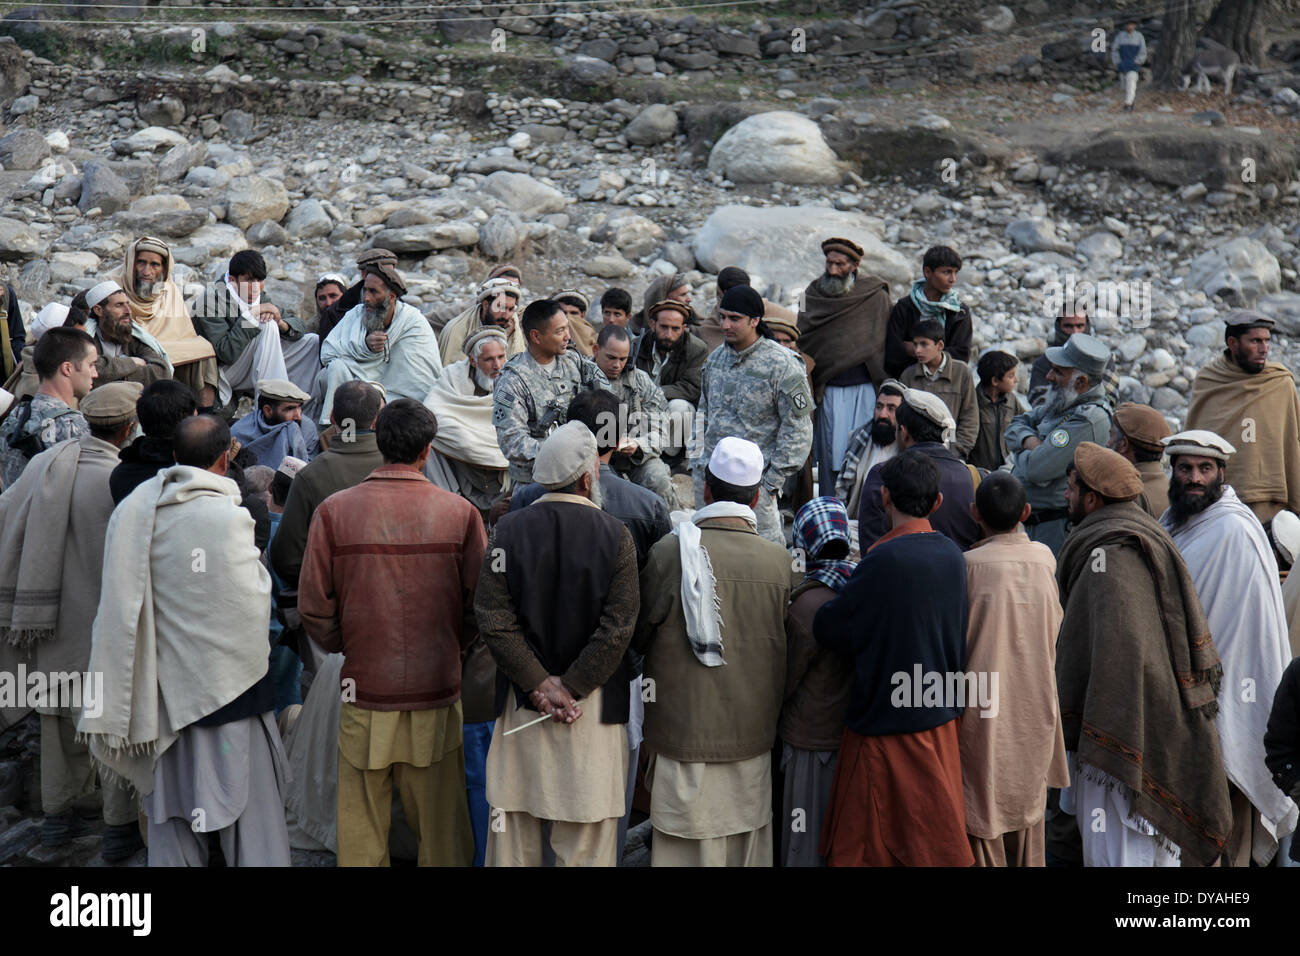 US Navy members with the Kunar Provincial Reconstruction Team, speak to Afghan residents during a shura, or meeting December 7, 2009 in Lachey village, Shigal district, Kunar province, Afghanistan. Stock Photo